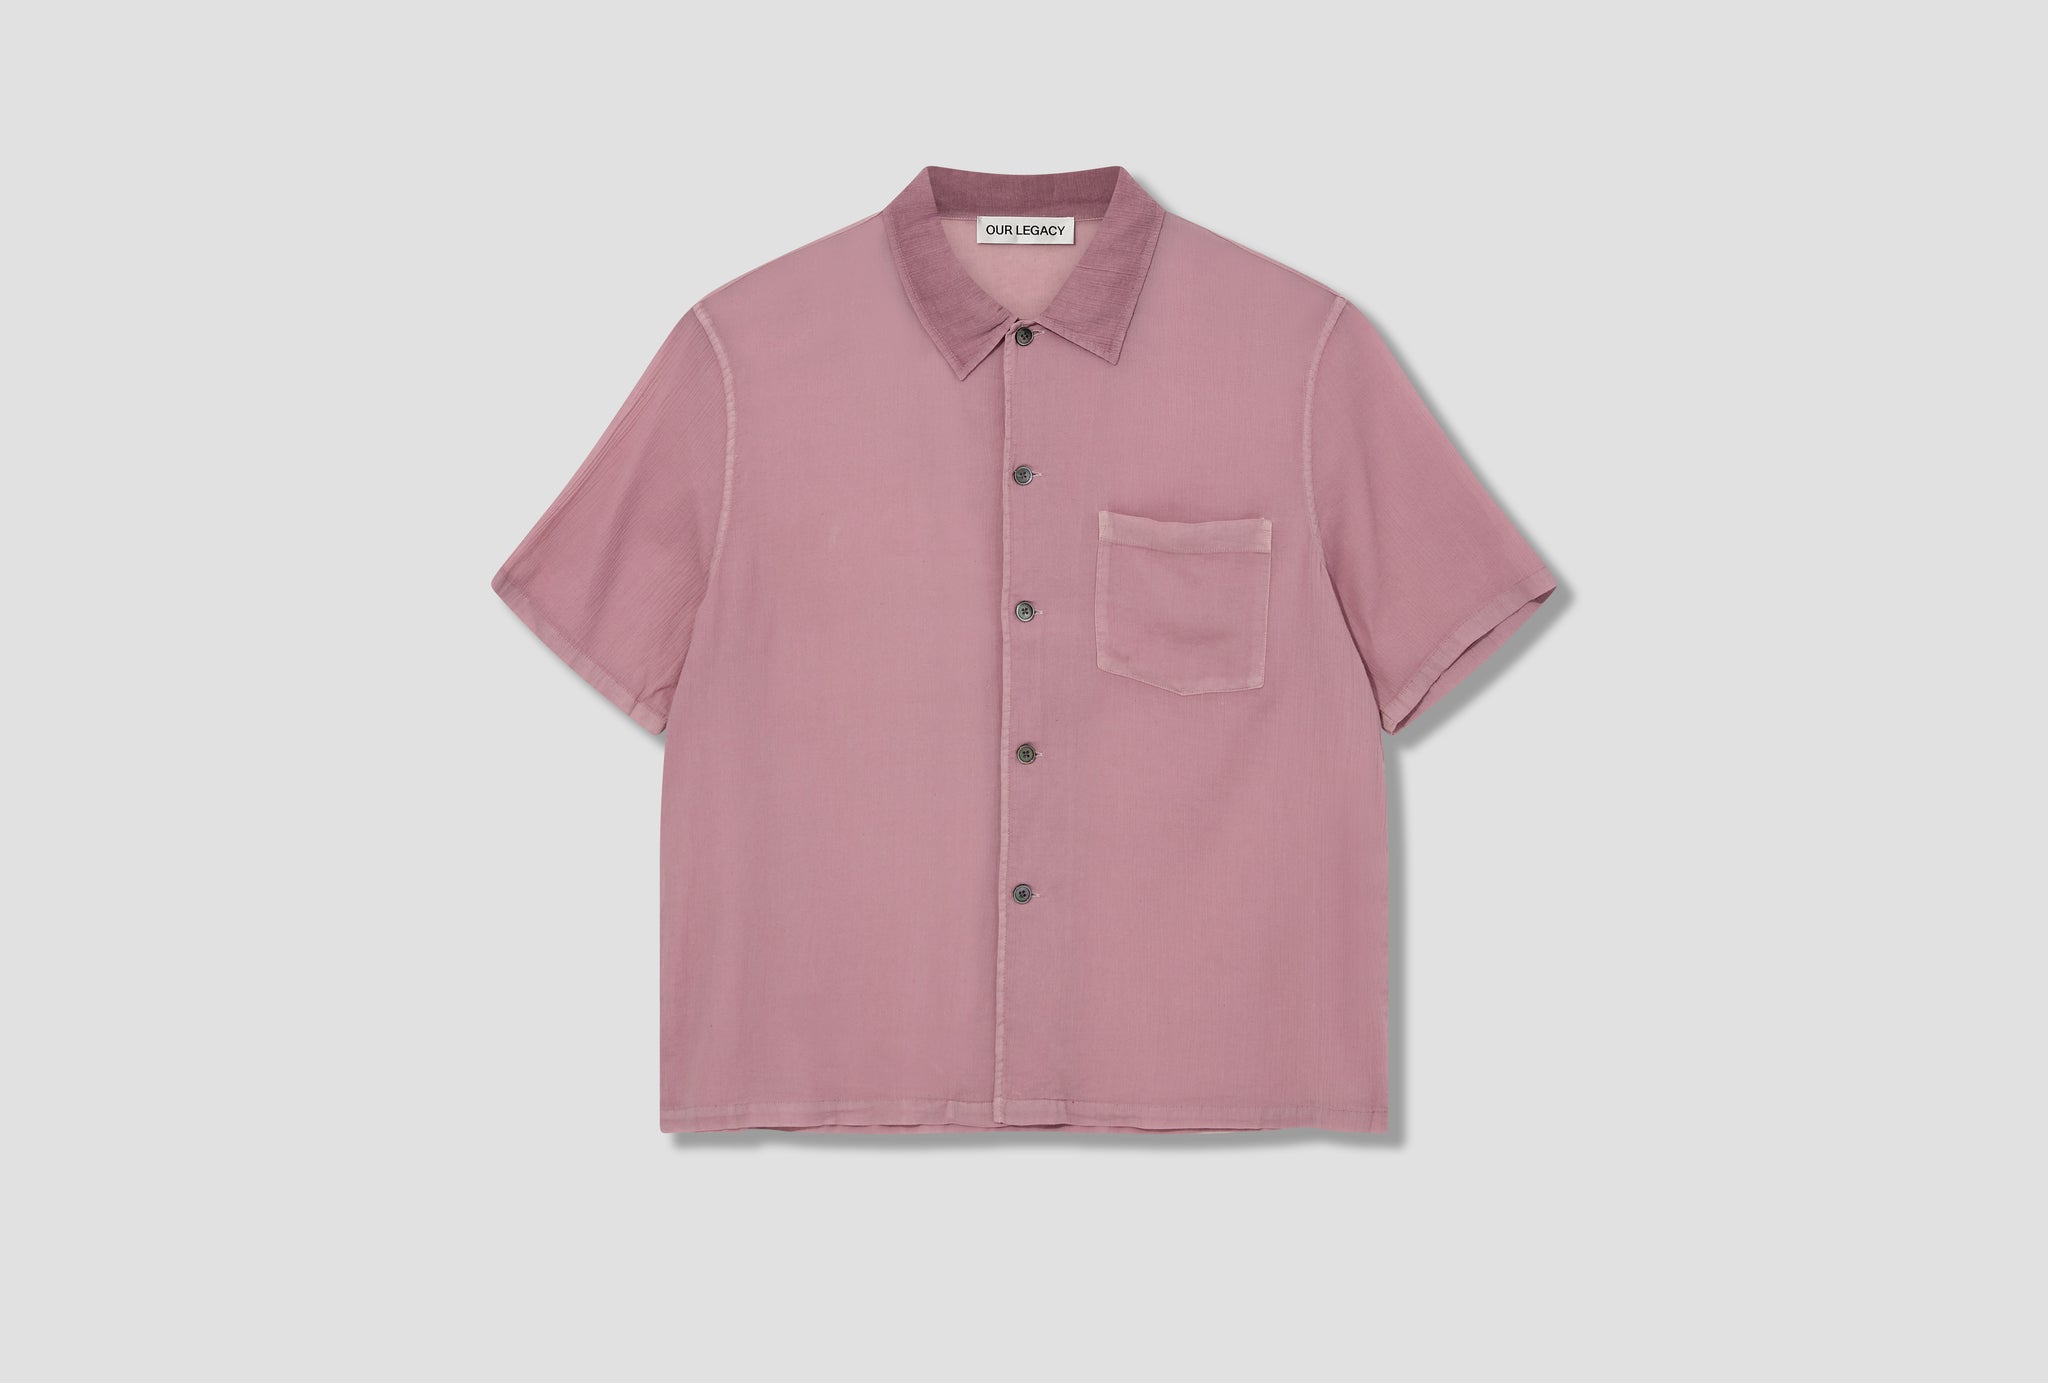 BOX SHIRT SHORTSLEEVE - DUSTY LILAC COATED VOILE M2242BLV